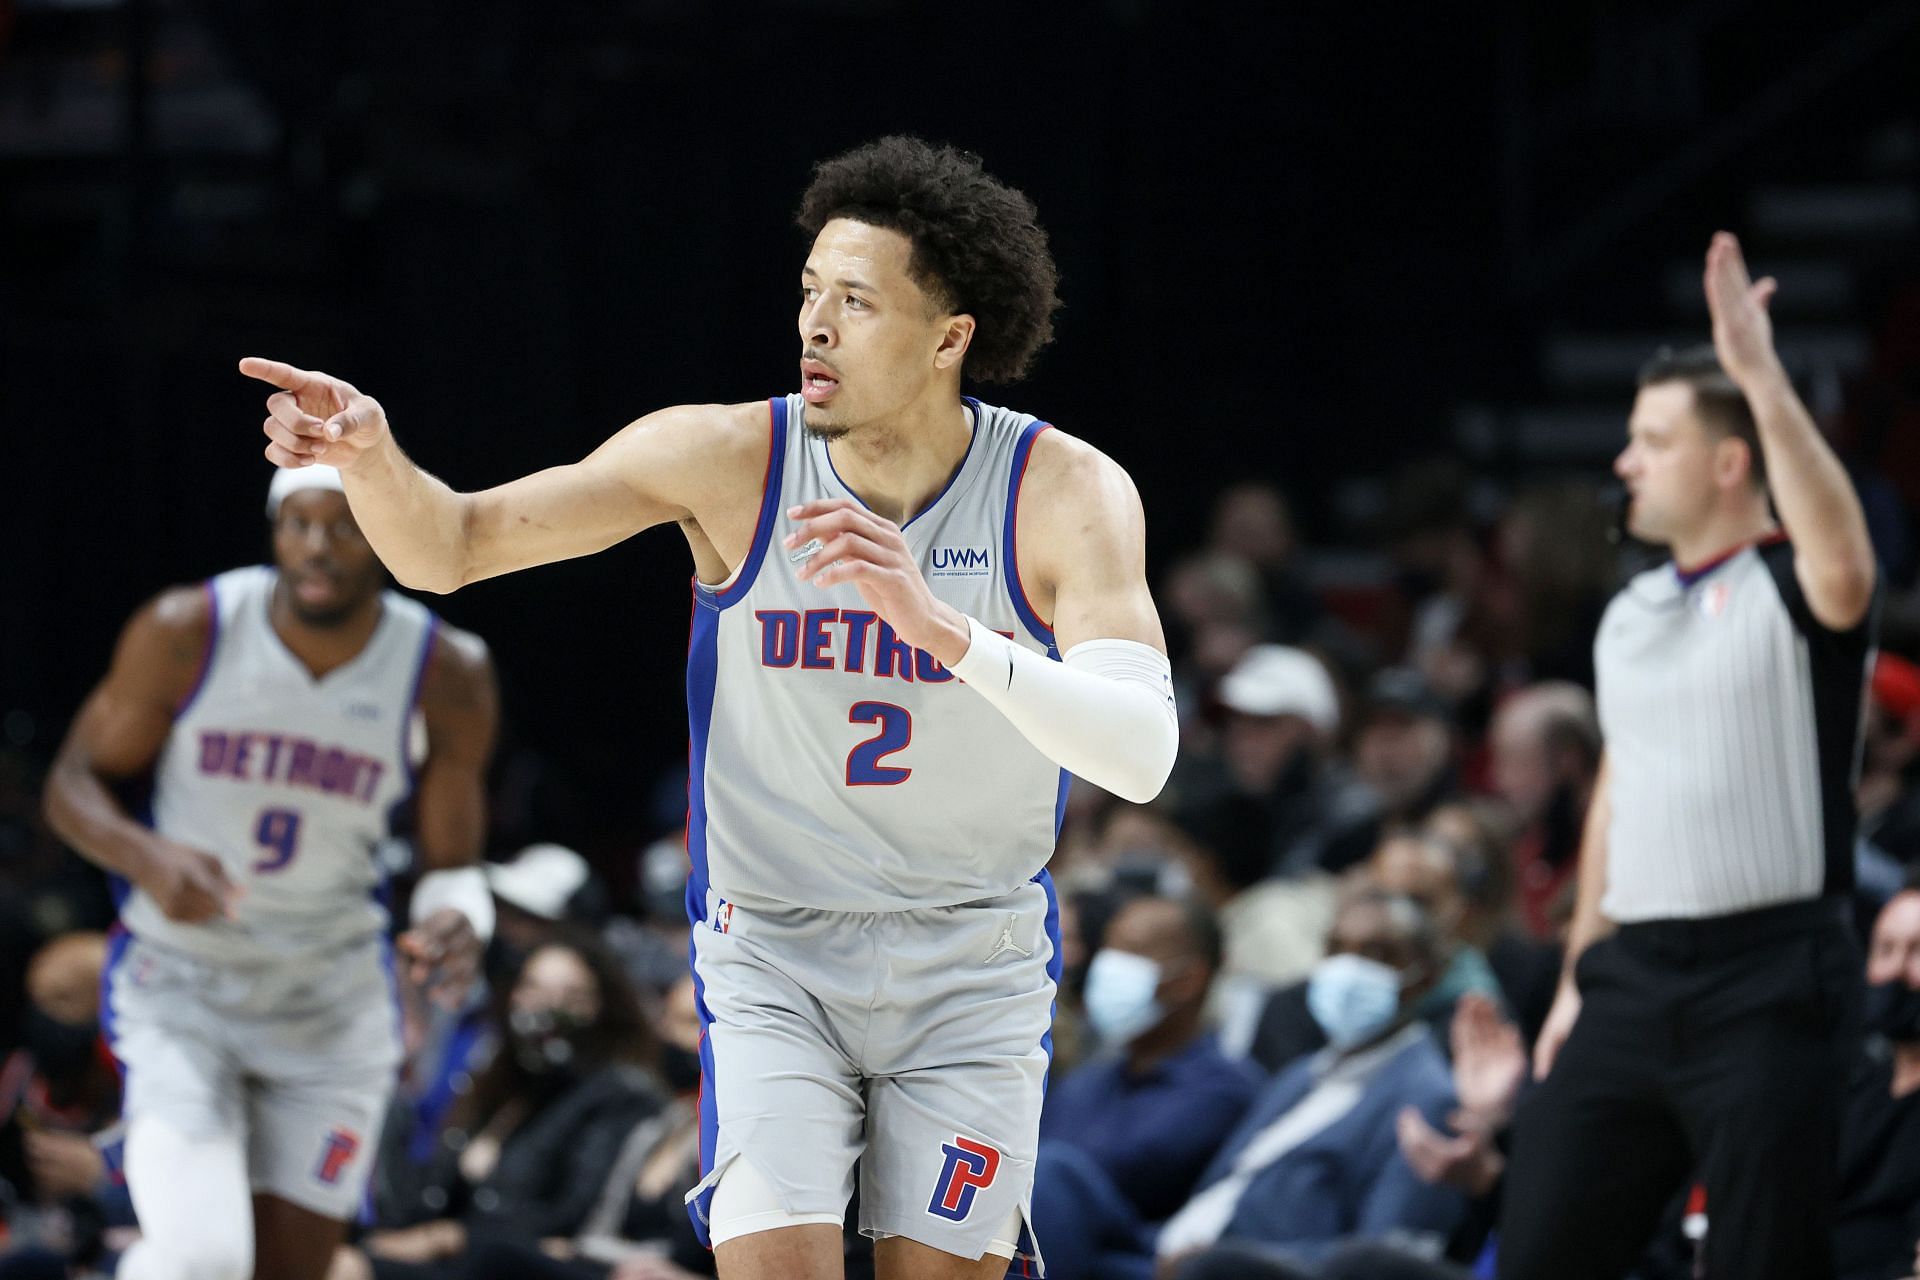 Cade Cunningham of the Detroit Pistons.